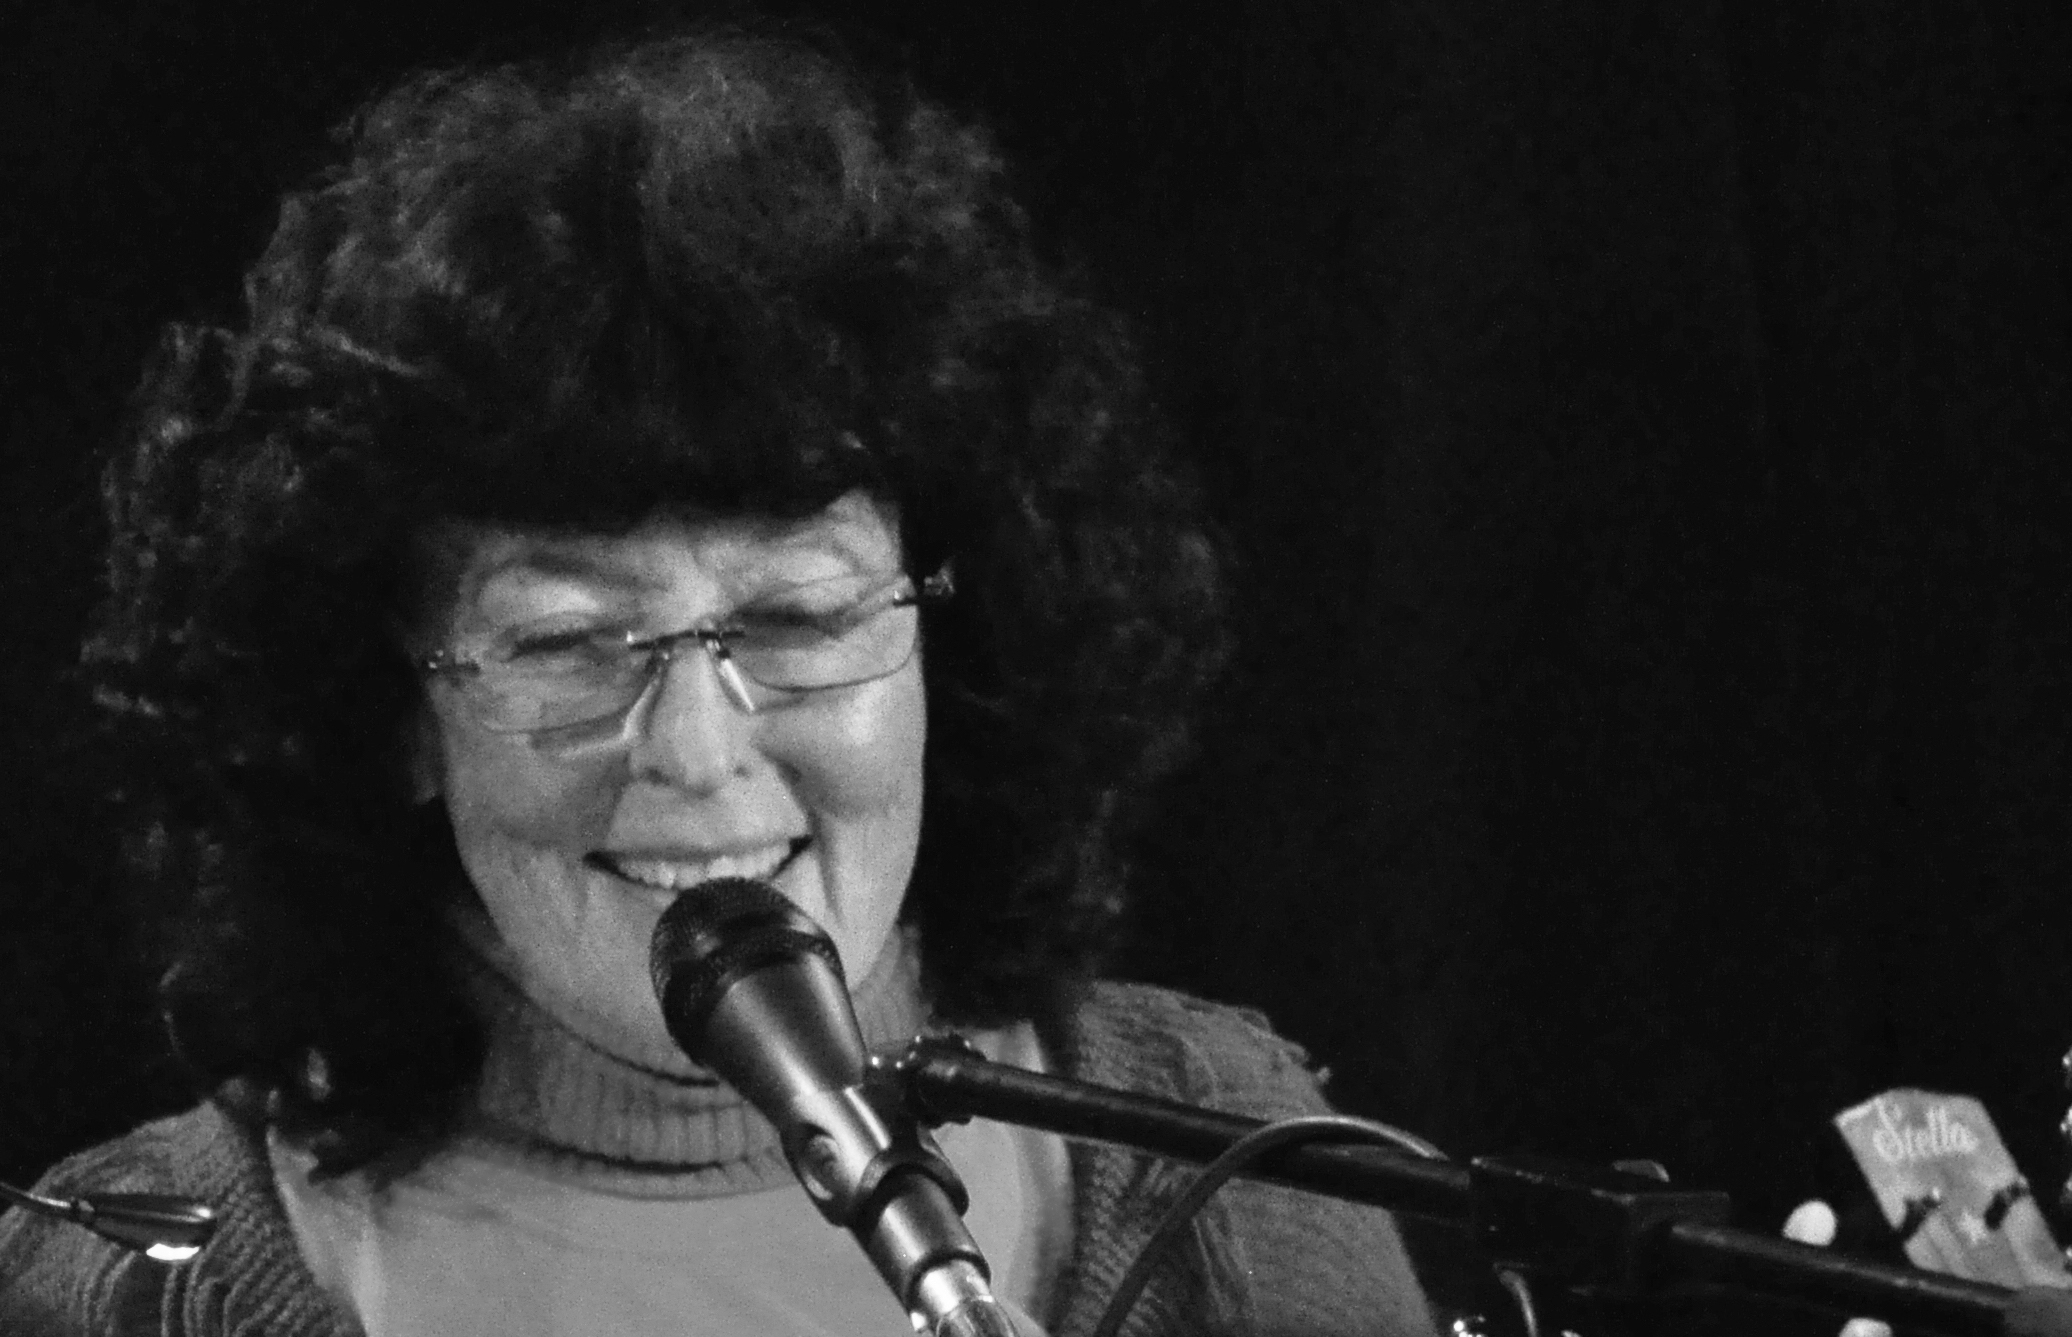 Black and white photo of Linda Perhacs speaking or singing into a microphone.